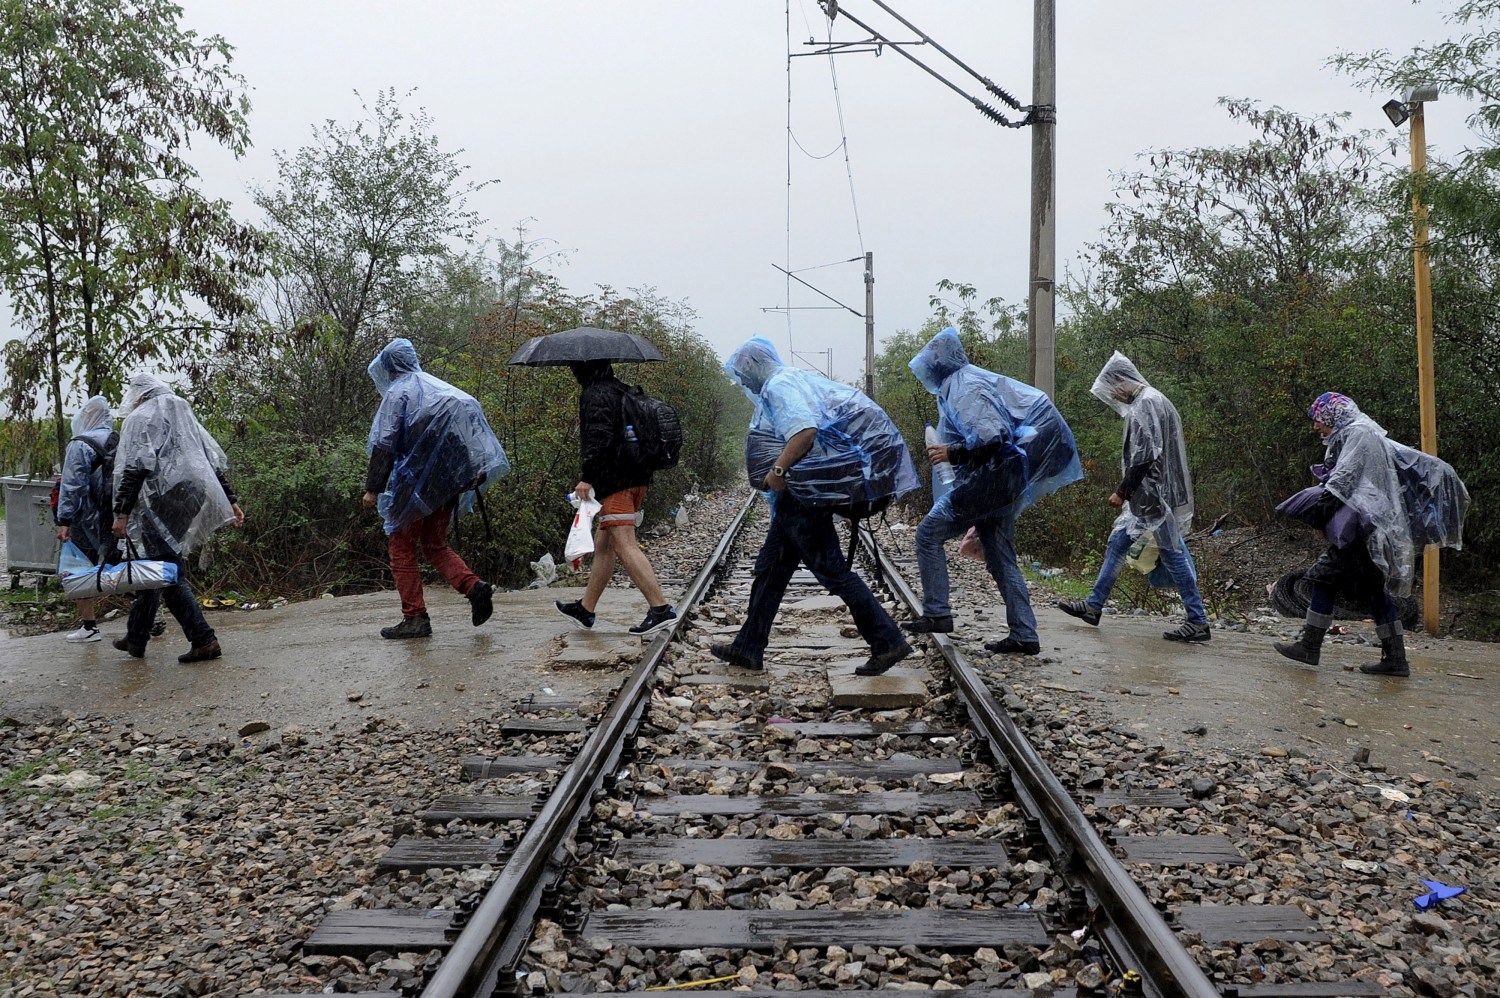 A group of Syrian refugees wearing plastic raincoats to protect from heavy rainfall, walk across a railway line into Macedonia near the Greek village of Idomeni, September 26, 2015. A record number of at least 430,000 refugees and migrants have taken rickety boats across the Mediterranean to Europe this year, 309,000 via Greece, according to International Organization for Migration figures. REUTERS/Alexandros Avramidis TPX IMAGES OF THE DAY - RTX1SLYV